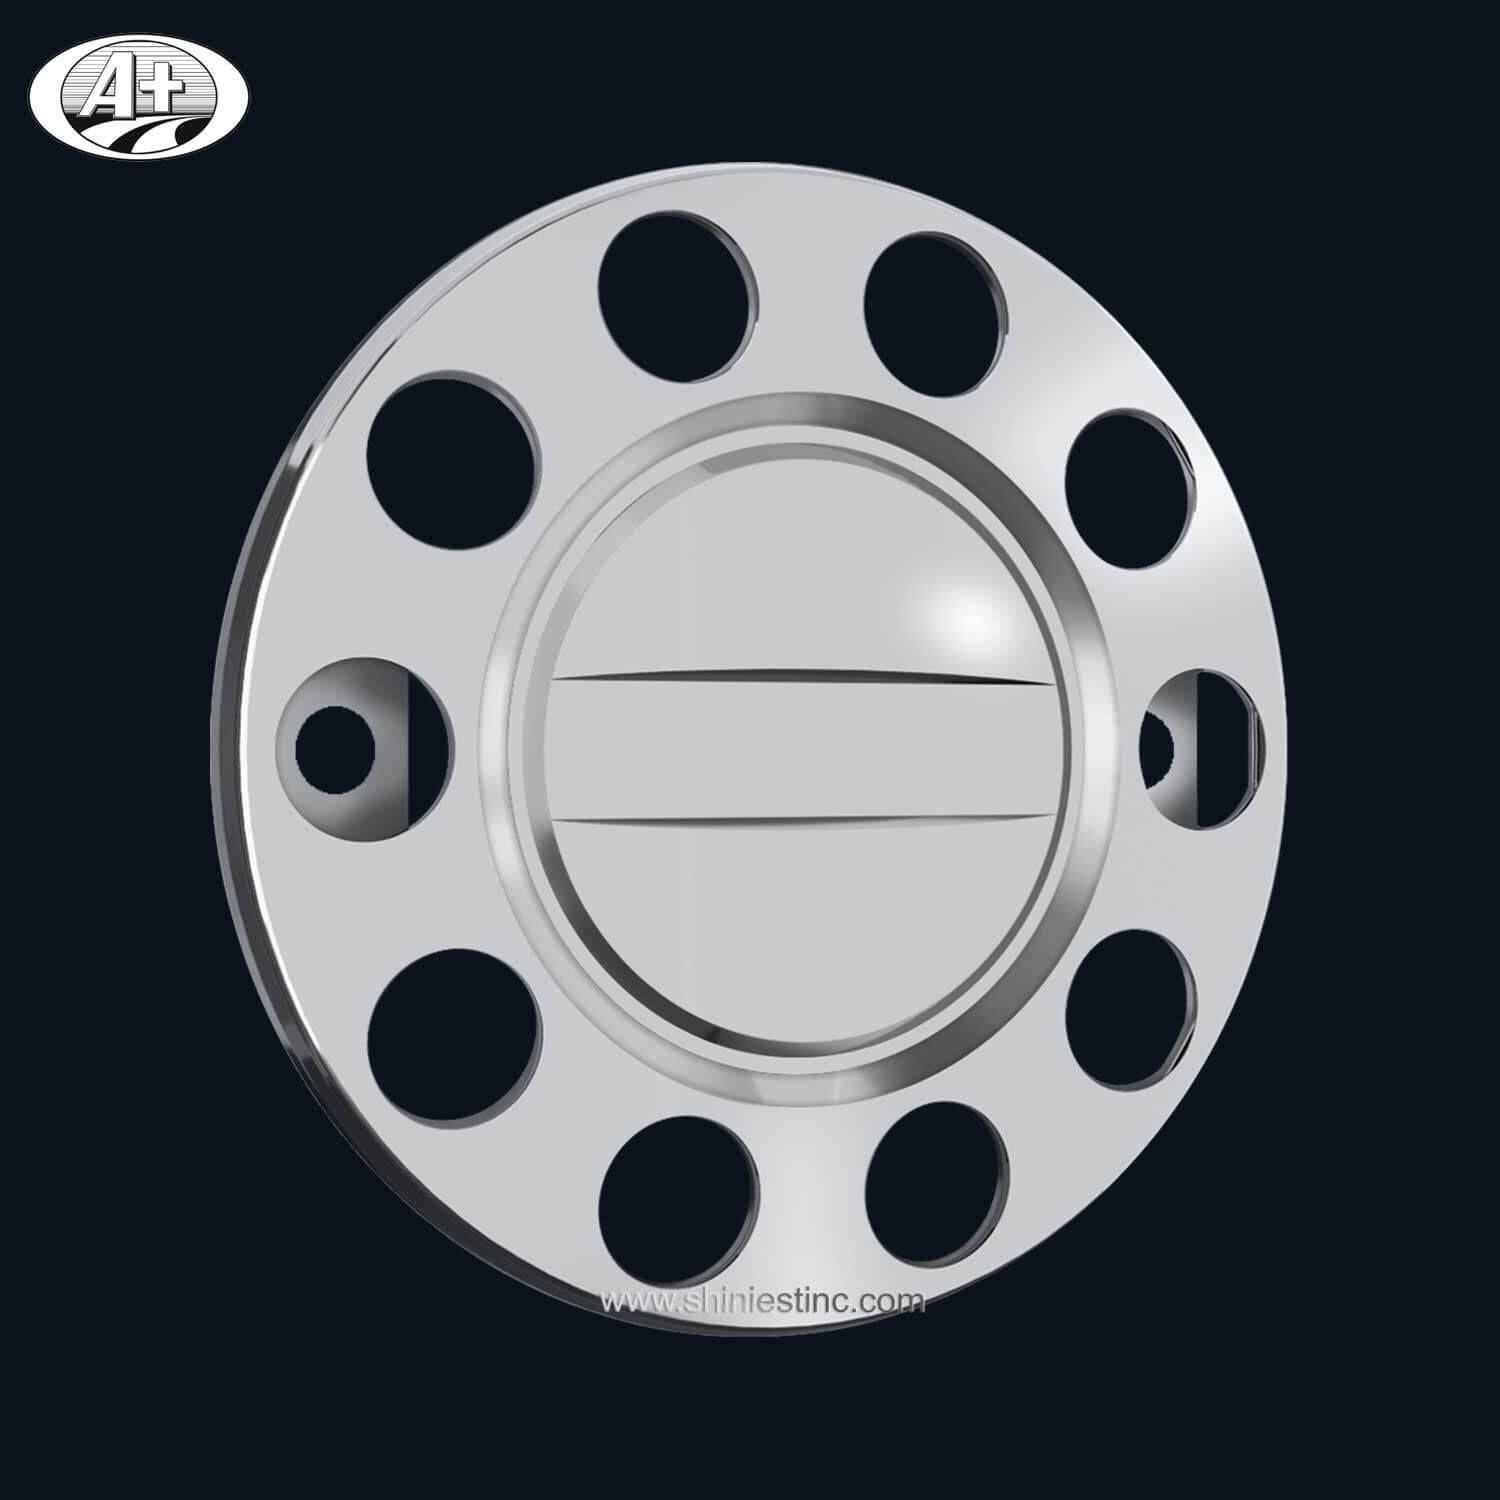 (15225F-P-A-AL) 22.5＂T304 Stainless Steel Protector Cover for Alloy Wheel (2 Brackets)